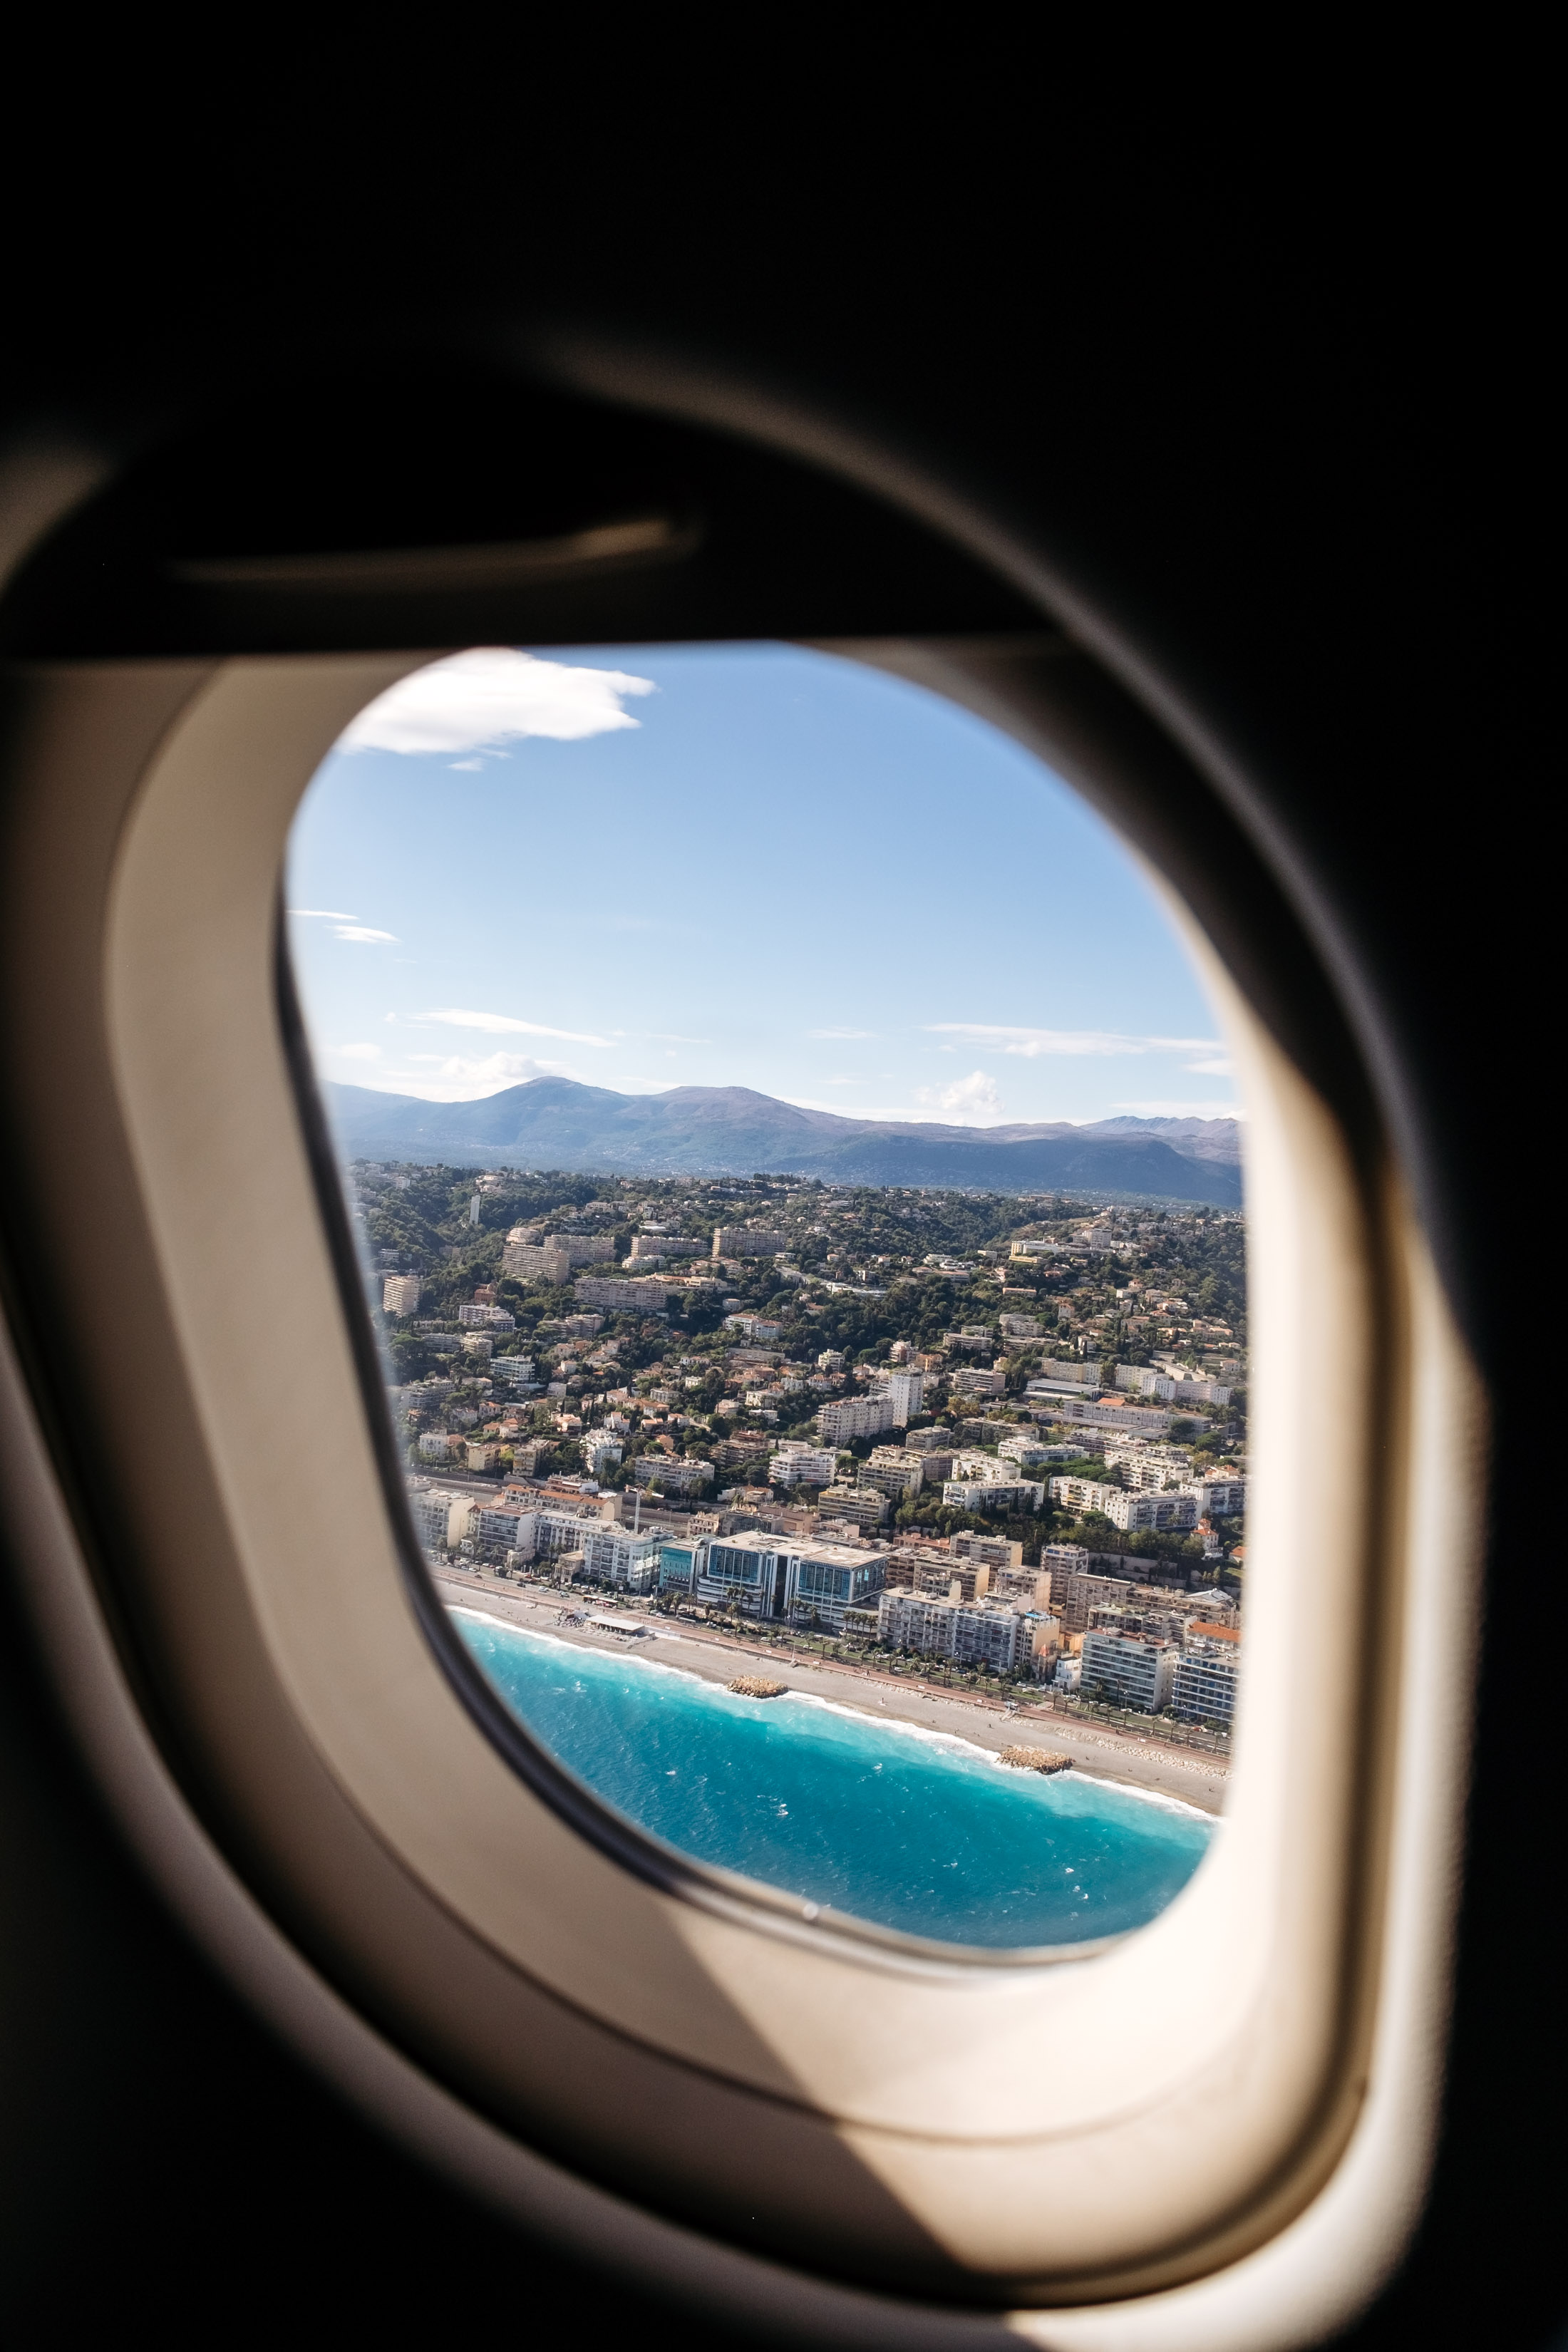 View from my airplane window arriving at Nice, France